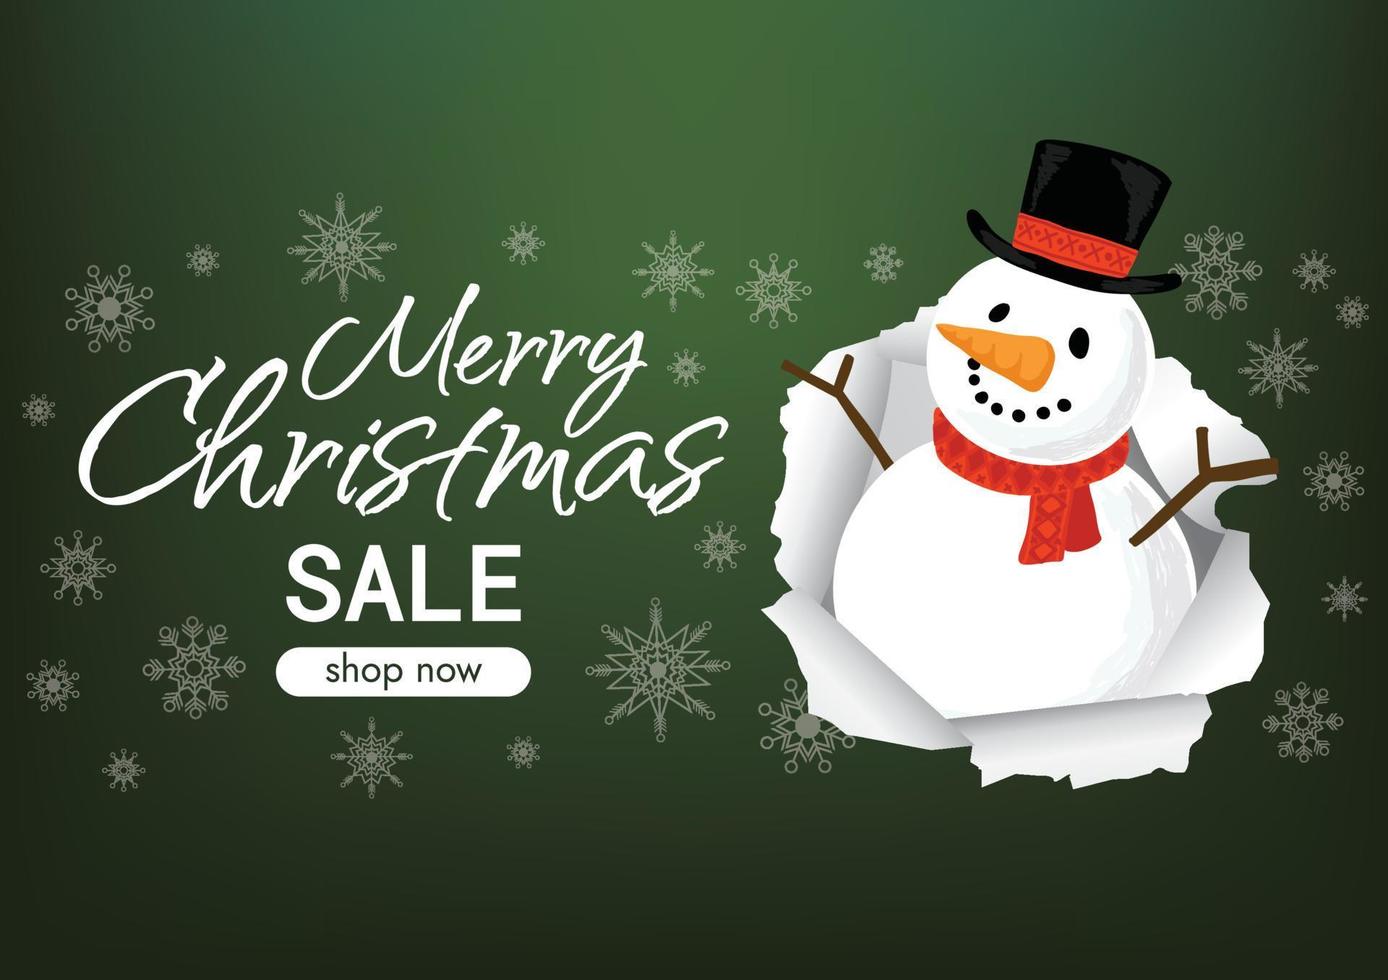 christmas hard sale promotion green design and cute christmas items vector